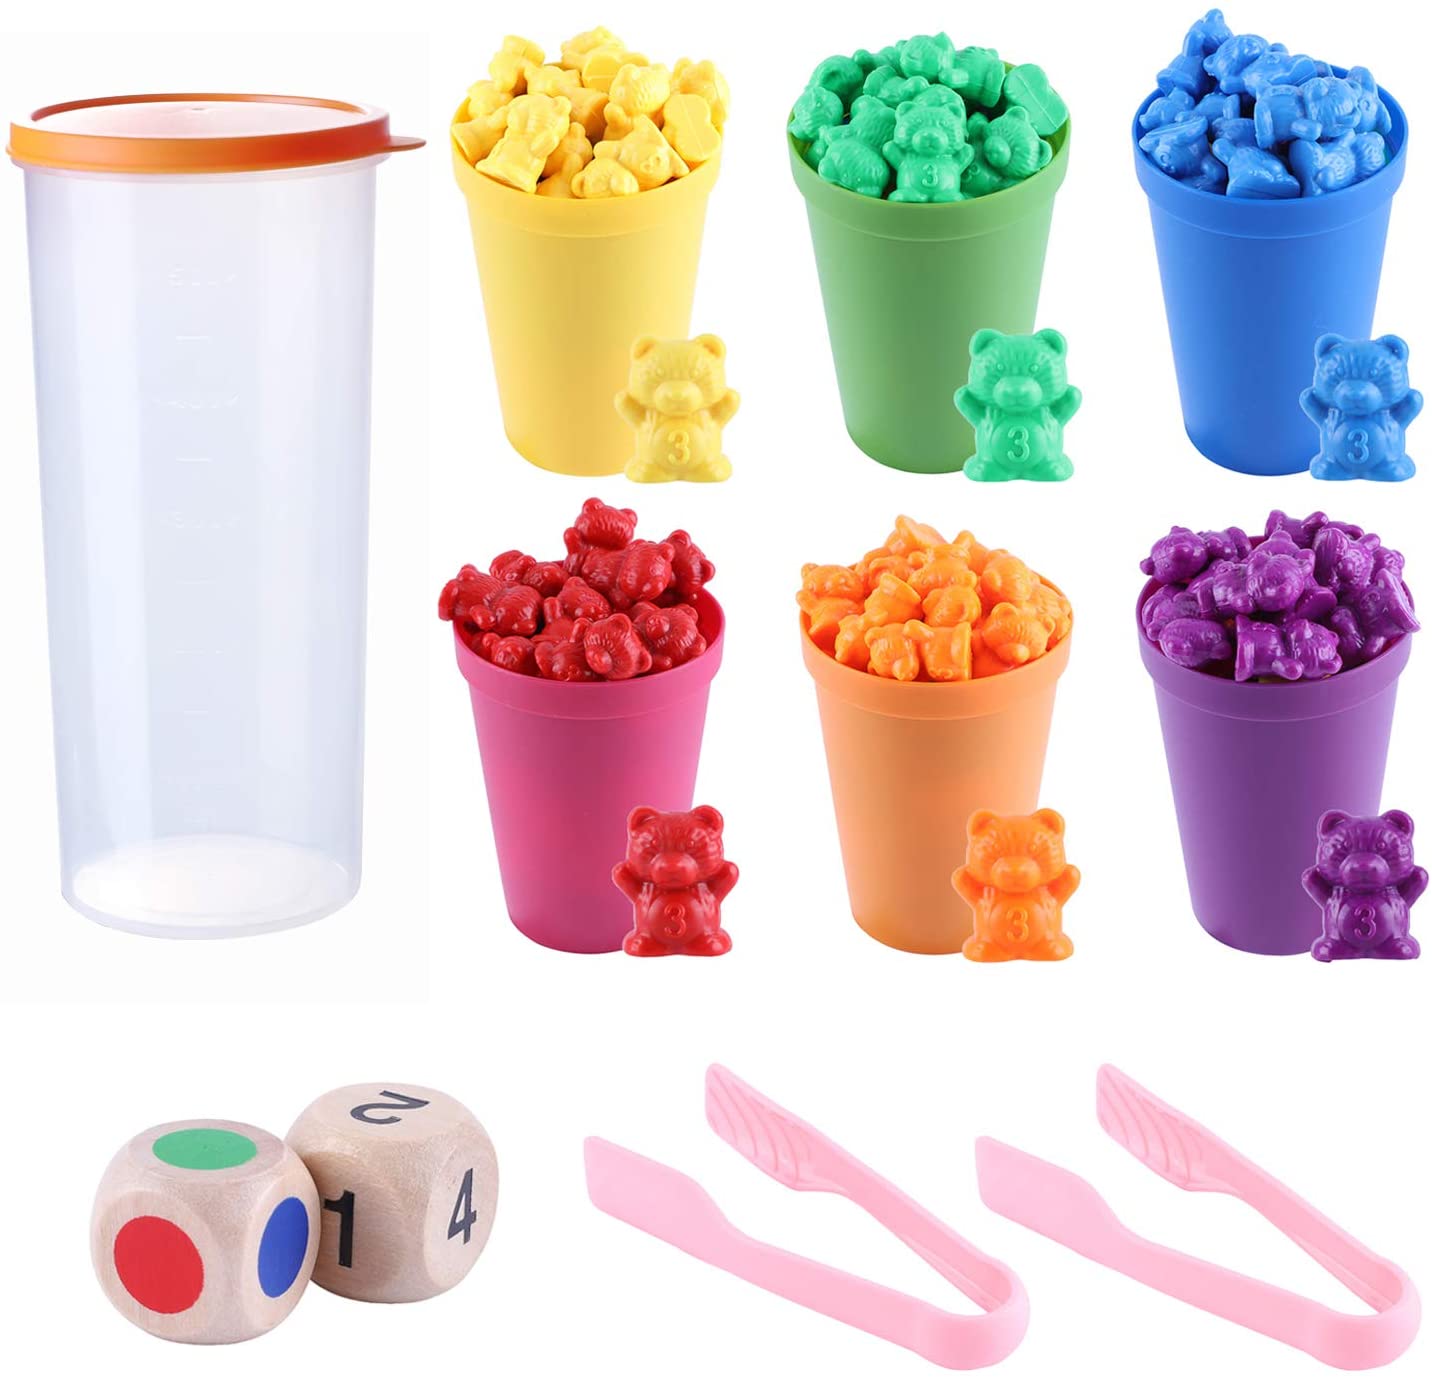 Rainbow Counting Bears with Matching Sorting Cups Dices and Tweezers Counting Bears Set Montessori Rainbow Matching Game Educational Color Sorting Toys for Toddlers Babies by MYCeator 71 Pcs